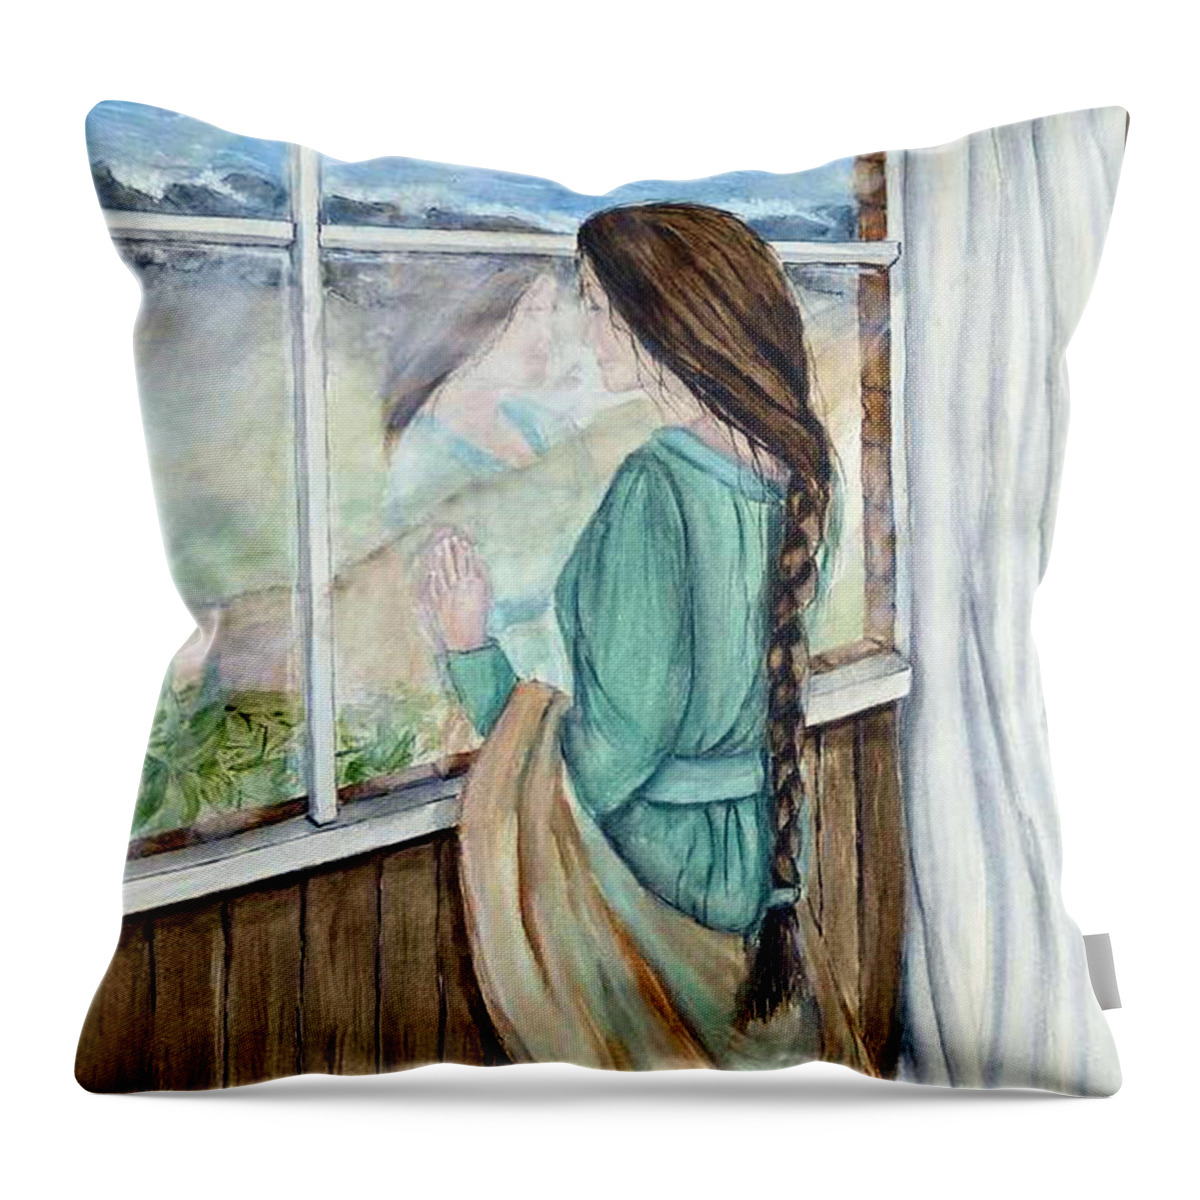 Young Girl Throw Pillow featuring the painting Her Dreams Are Out There by Kelly Mills